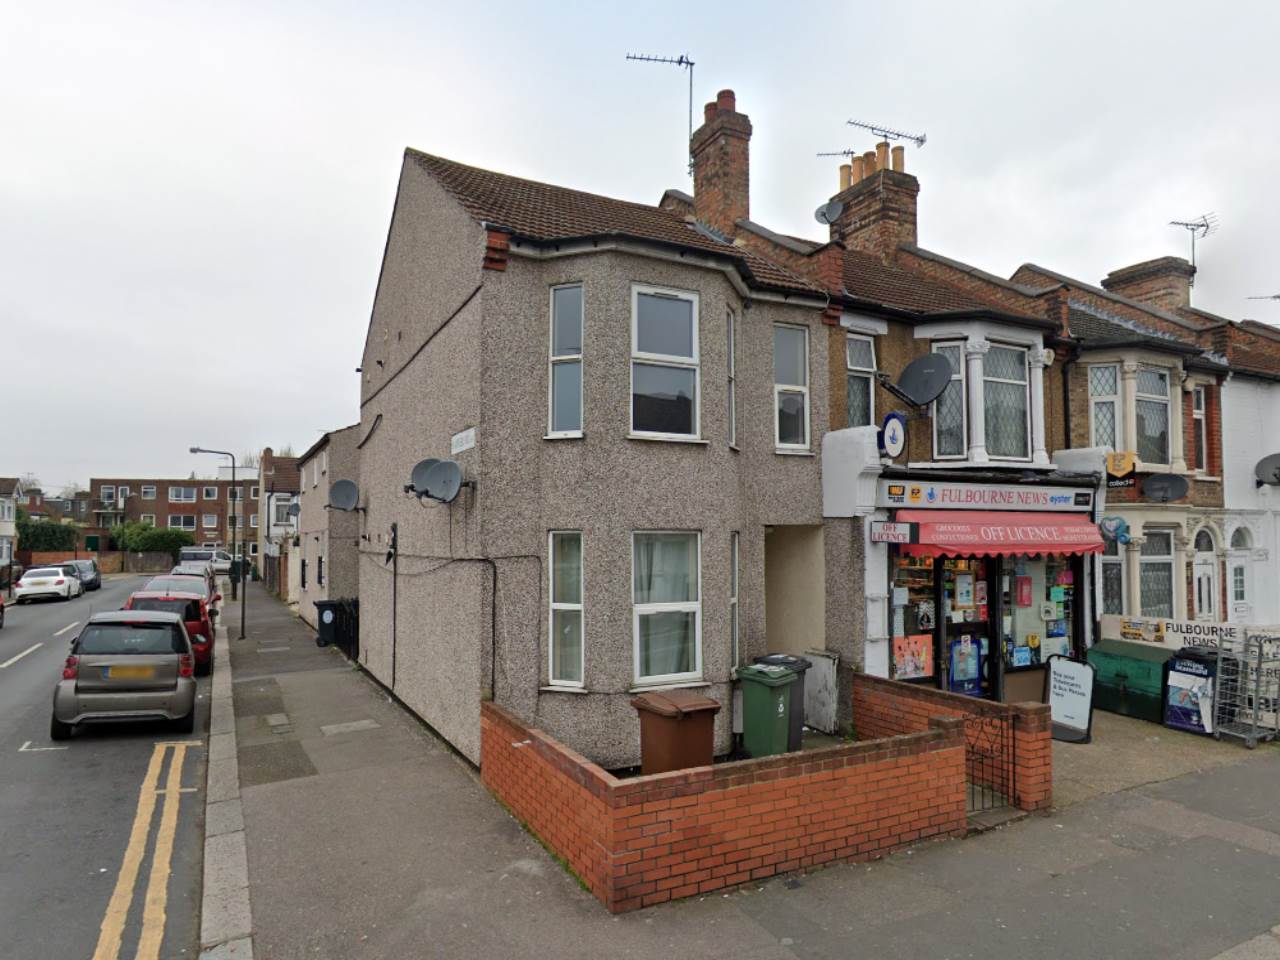 1 bed flat to rent in Fulbourne Road, Walthamstow, E17 